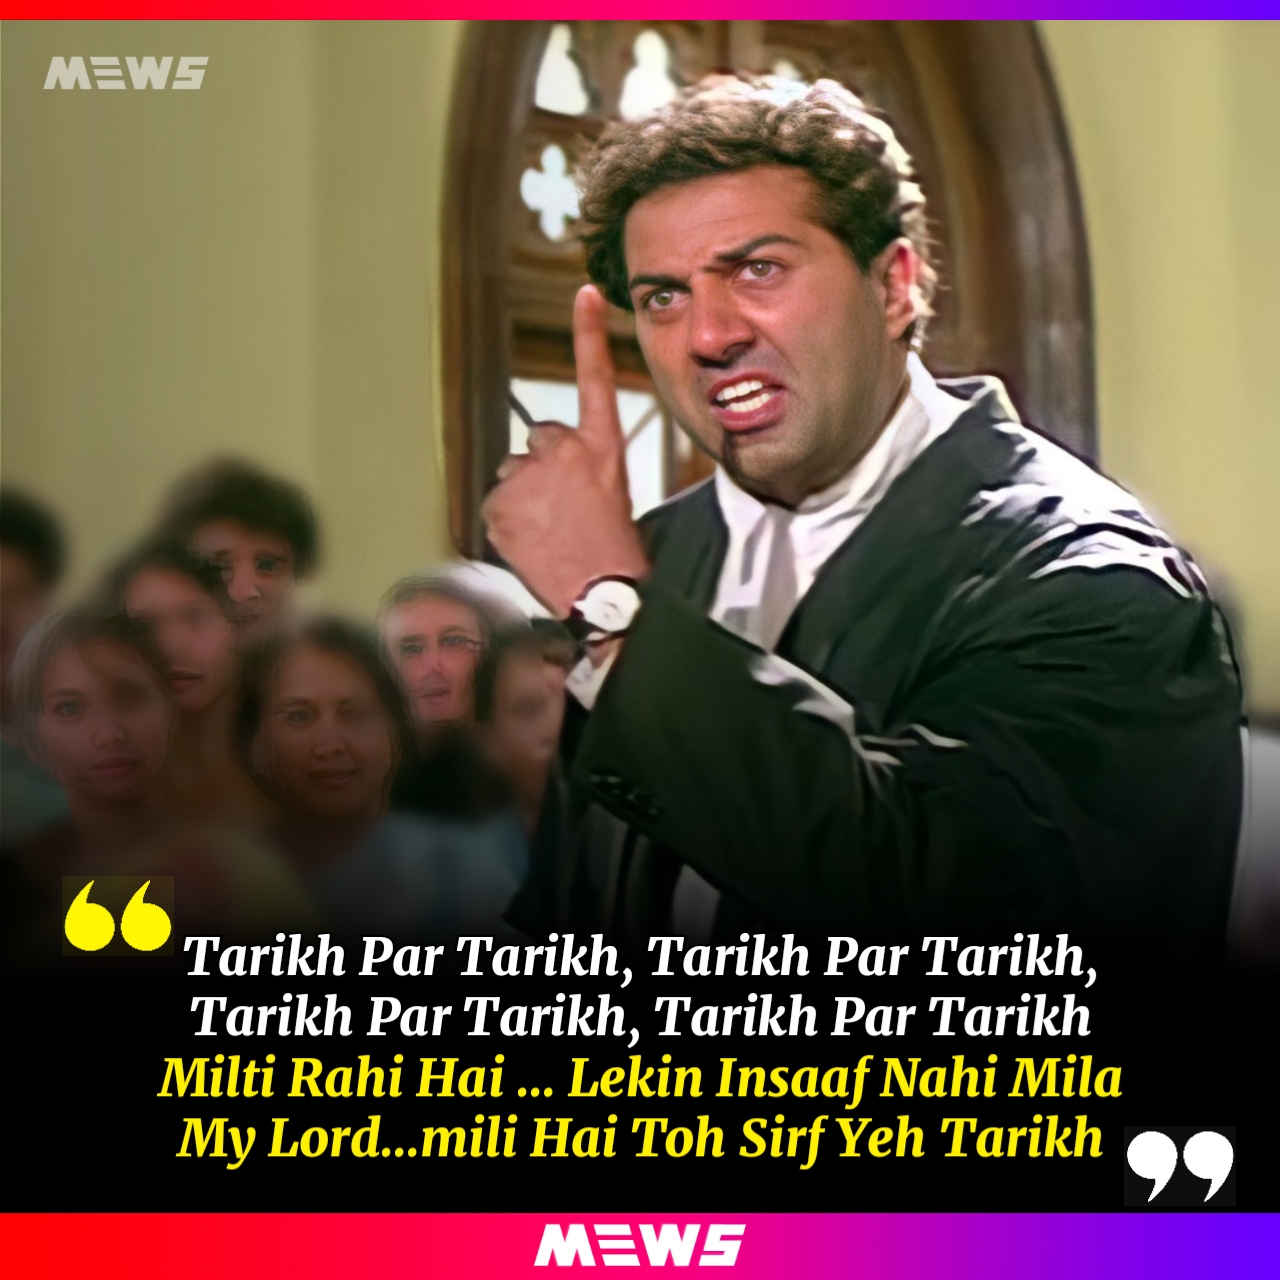 famous Bollywood dialogues